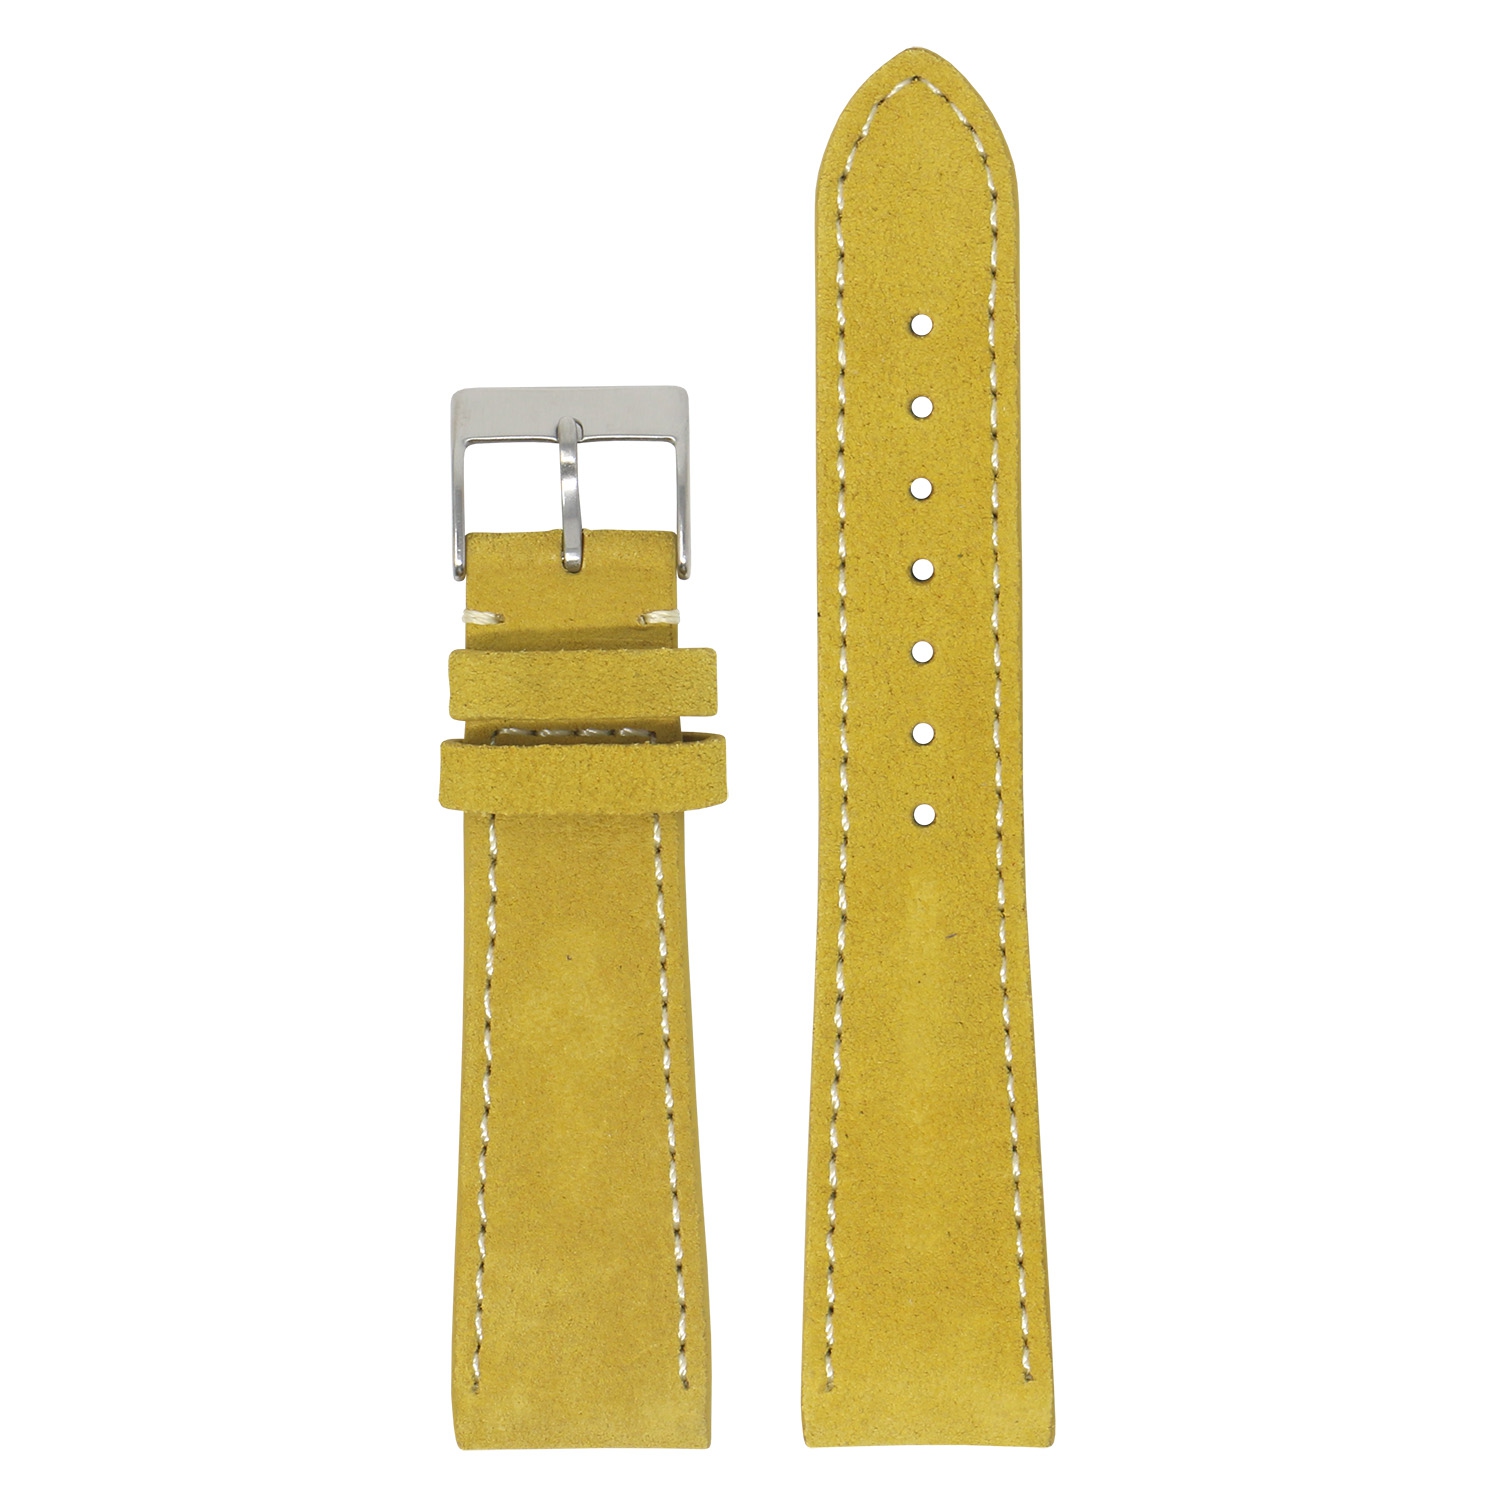 StrapsCo Classic Suede Watch Band Strap (Short, Standard, Long) for Fitbit Charge 4 & Charge 3 - Short - Yellow